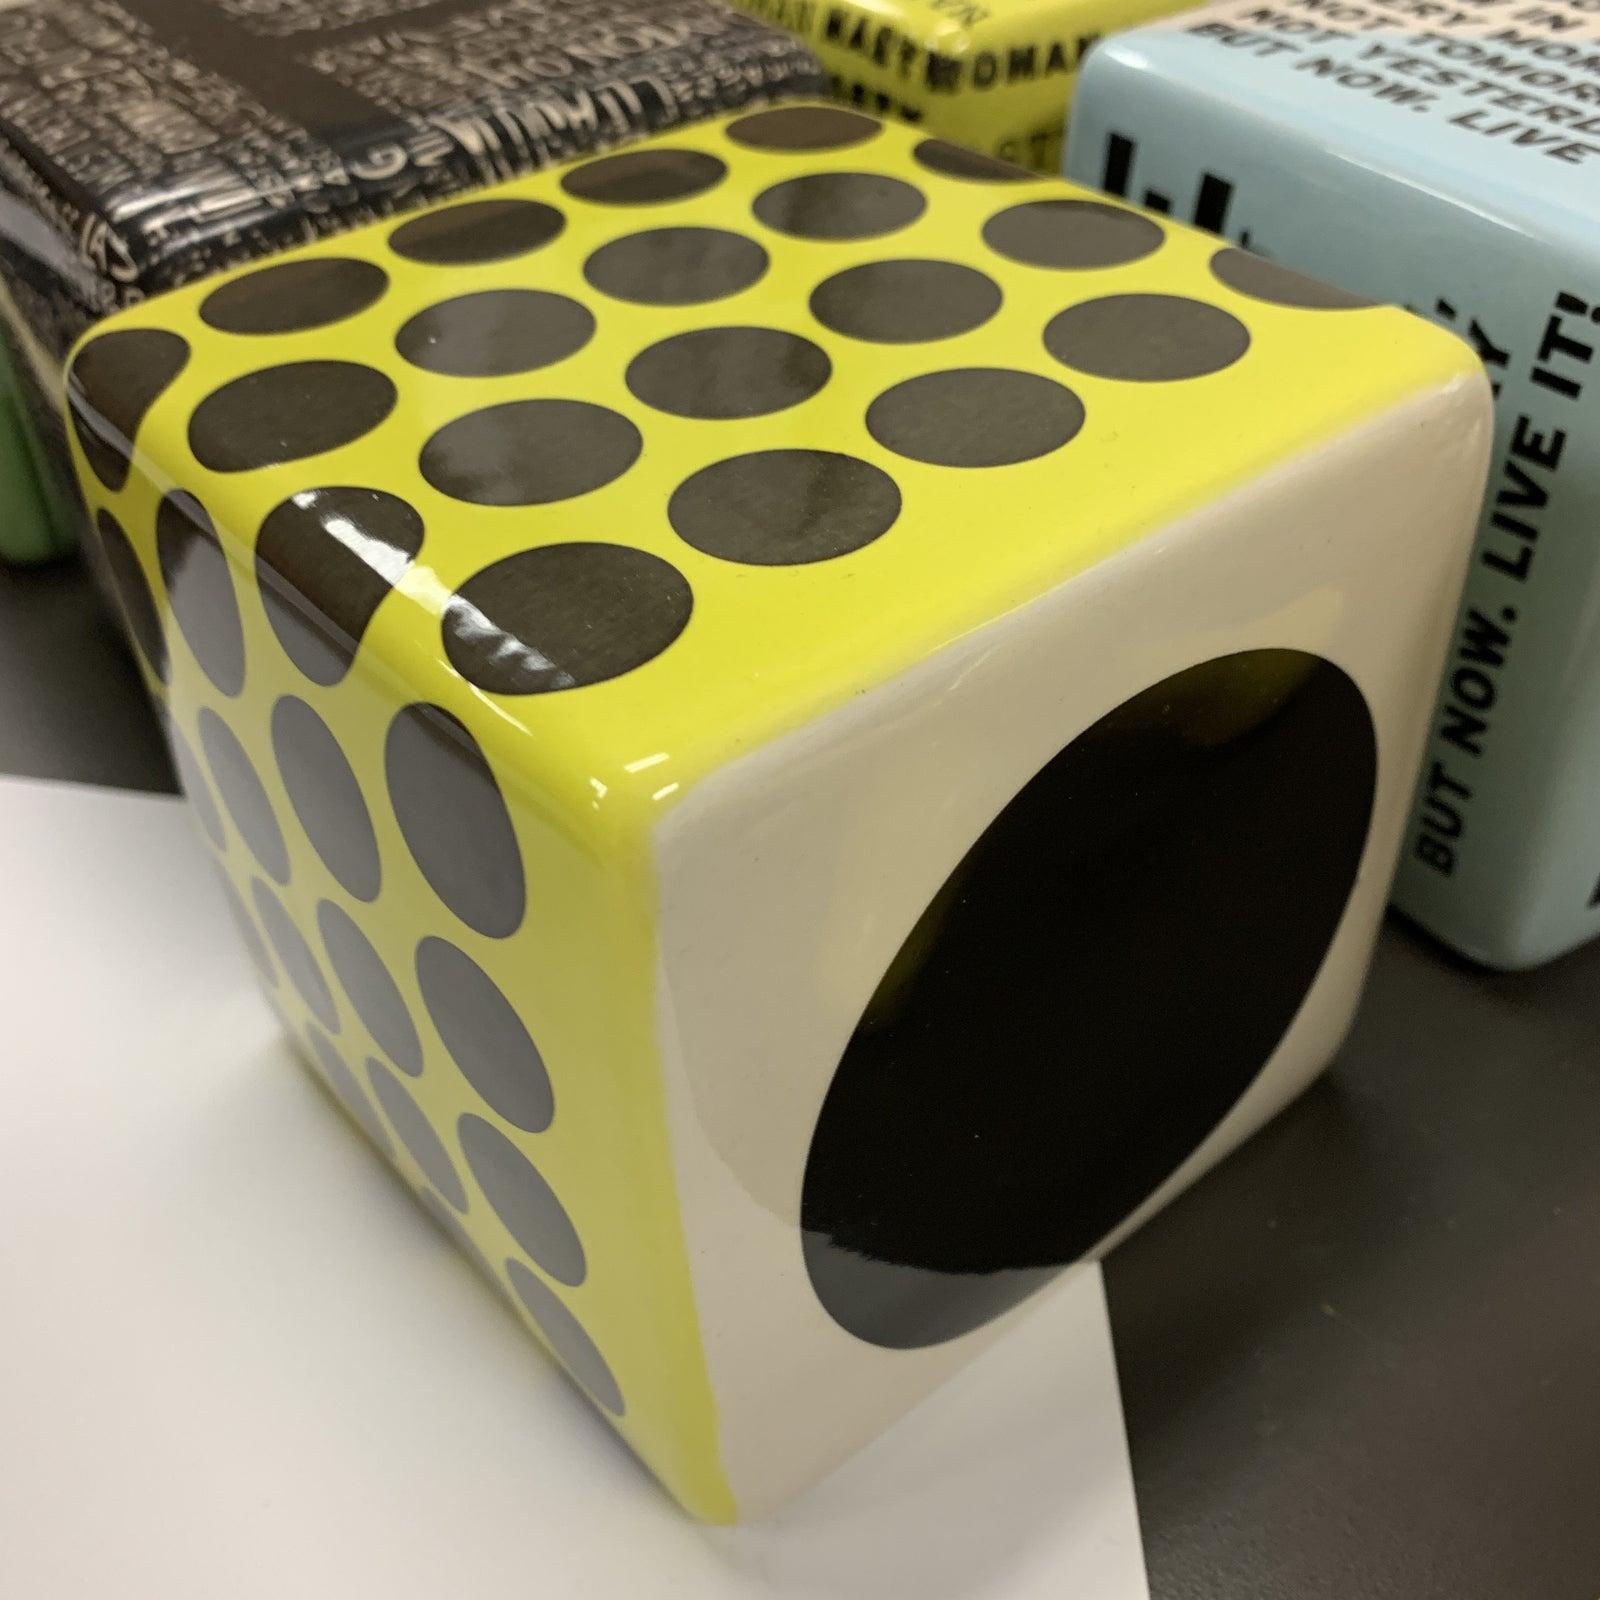 Artist: Kaiser Suidan
4 x 4 x 4
Ceramic Wall Cube Sculpture
Signed on the bottom

Decal has yellow & black dots. hangs very easily on a screw or can be used as tabletop decor.

Bio:
From first generation Lebanese descent, Kaiser Suidan was raised in